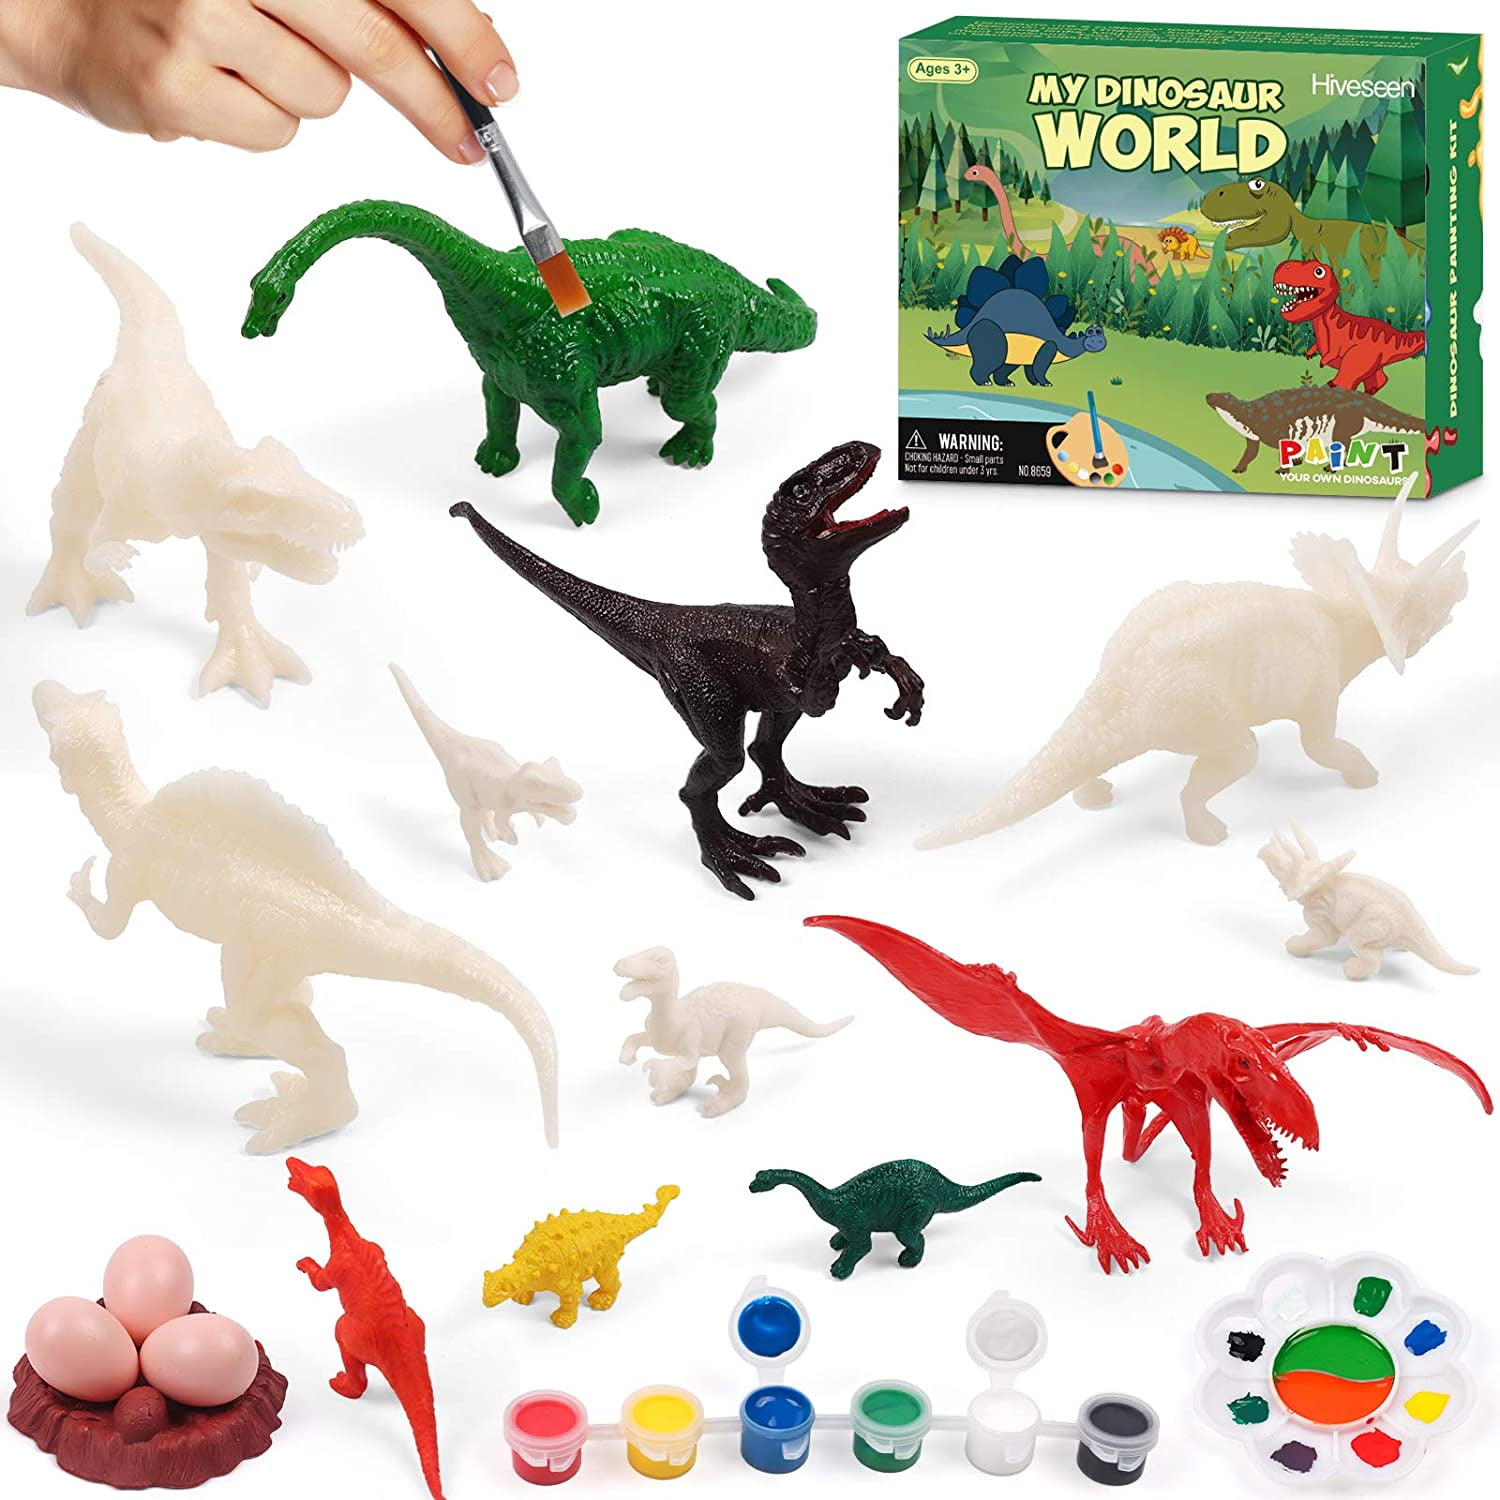 Art Supplies for Kids Paint Your Own Dinosaur Creativity DIY 3D Painting Dinosaurs Toys Arts and Crafts for Boys Girls Age 3,4,5,6,7,8 Years Old Big Size Dinosaur Painting Kit for Kids Crafts